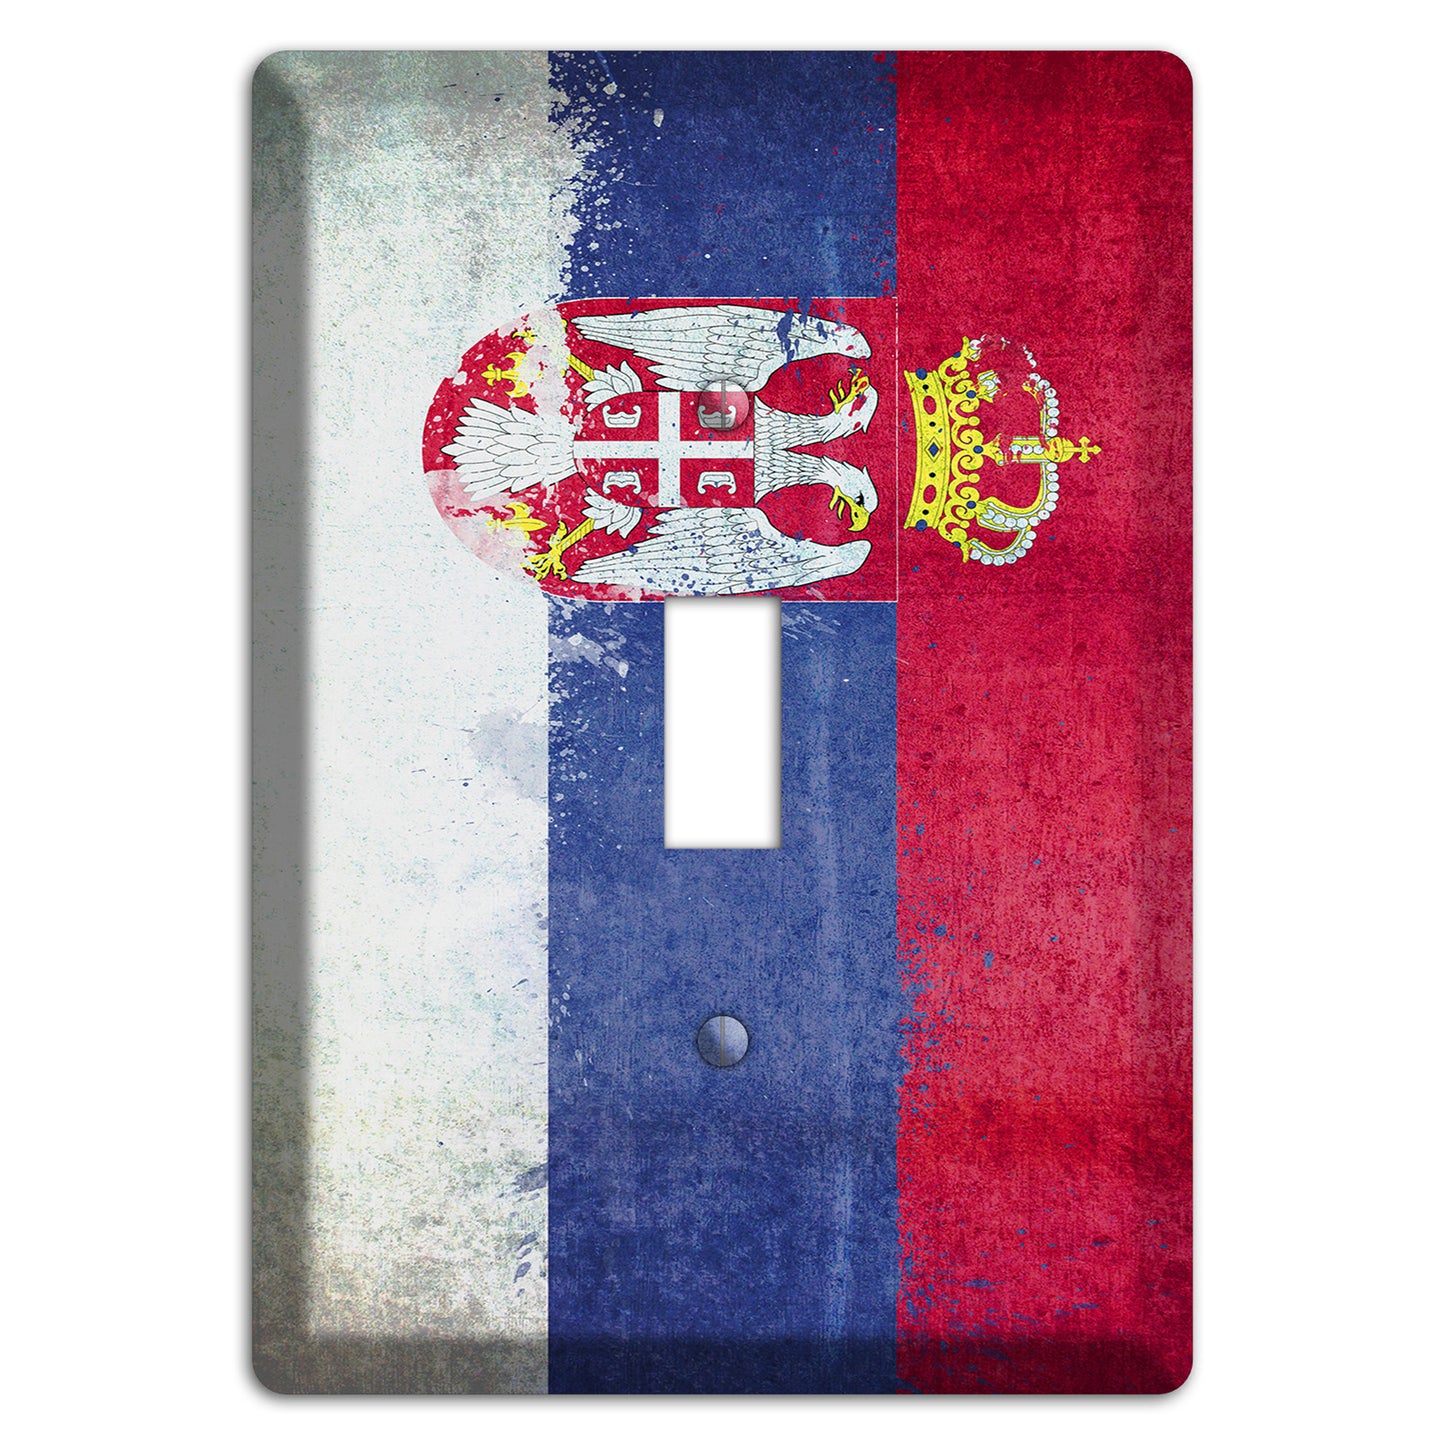 Serbia Cover Plates Cover Plates